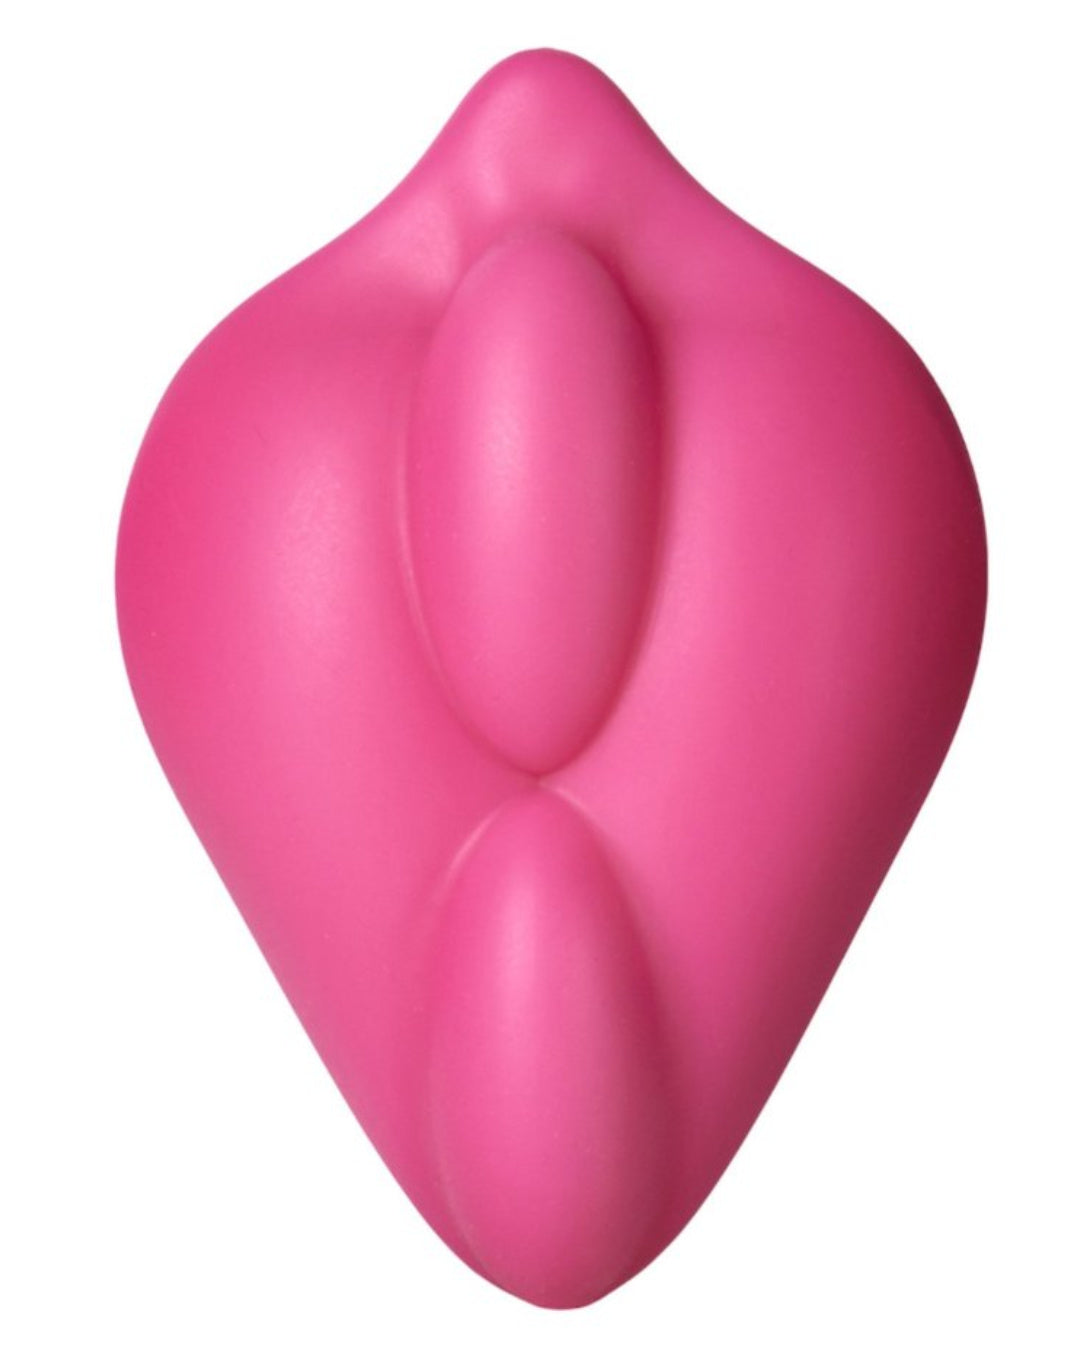 Bumpher Textured Dildo Base for Harness Play - Various Colors pink